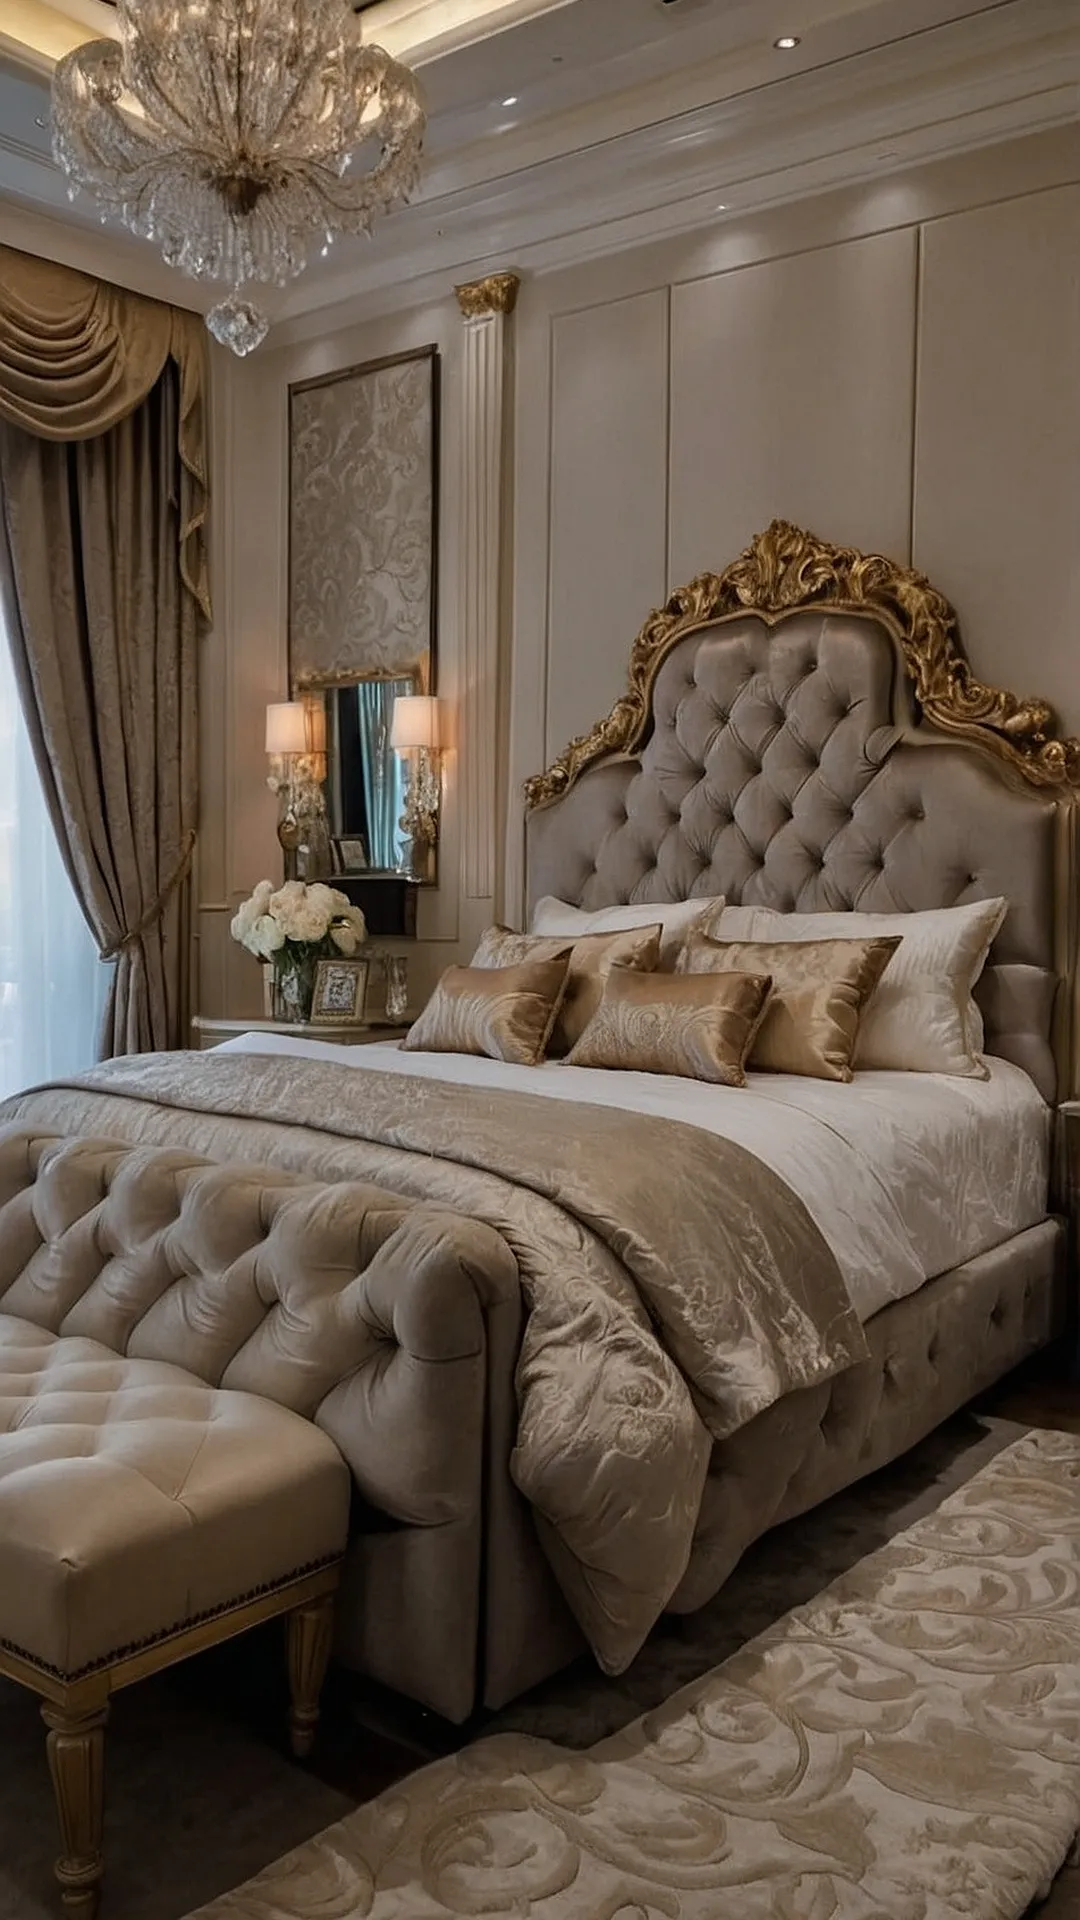 Chic Chambers: Classy Bedrooms to Inspire